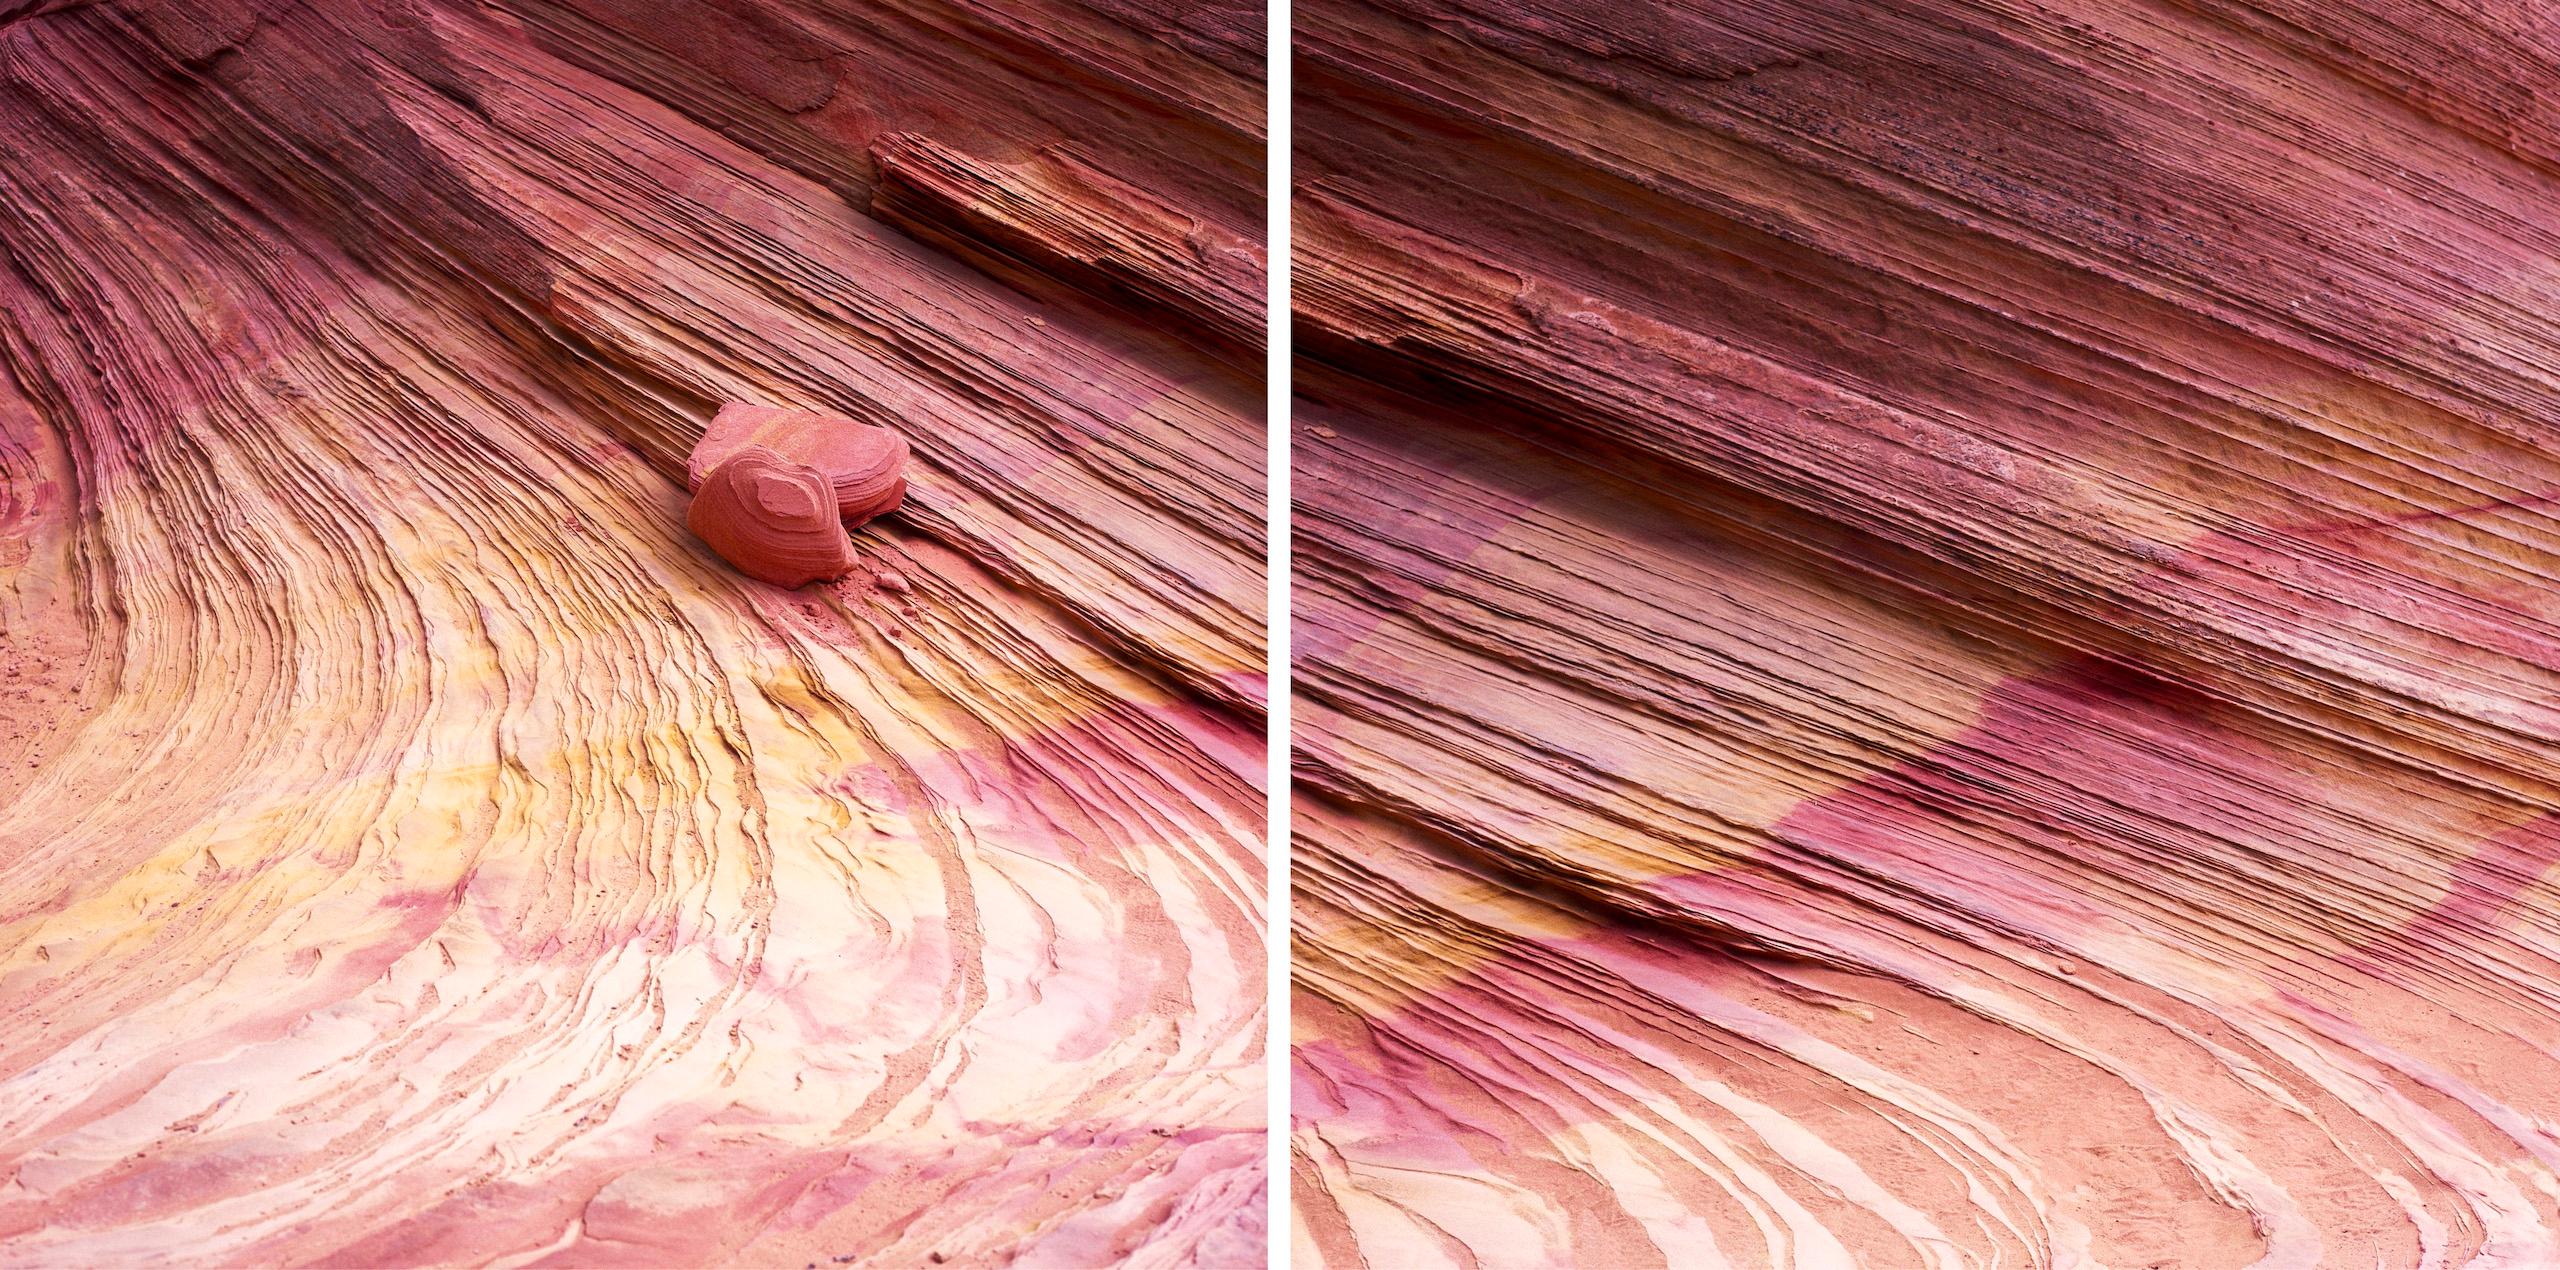 Strata IV is a limited-edition diptych photograph by contemporary artist Luca Marziale. 

This photograph is sold unframed as a print only. It is available in 2 sizes:
*76.2 cm × 152.4 cm (30" × 60"), edition of 10 copies
*114.3 cm × 228.6 cm (45" ×